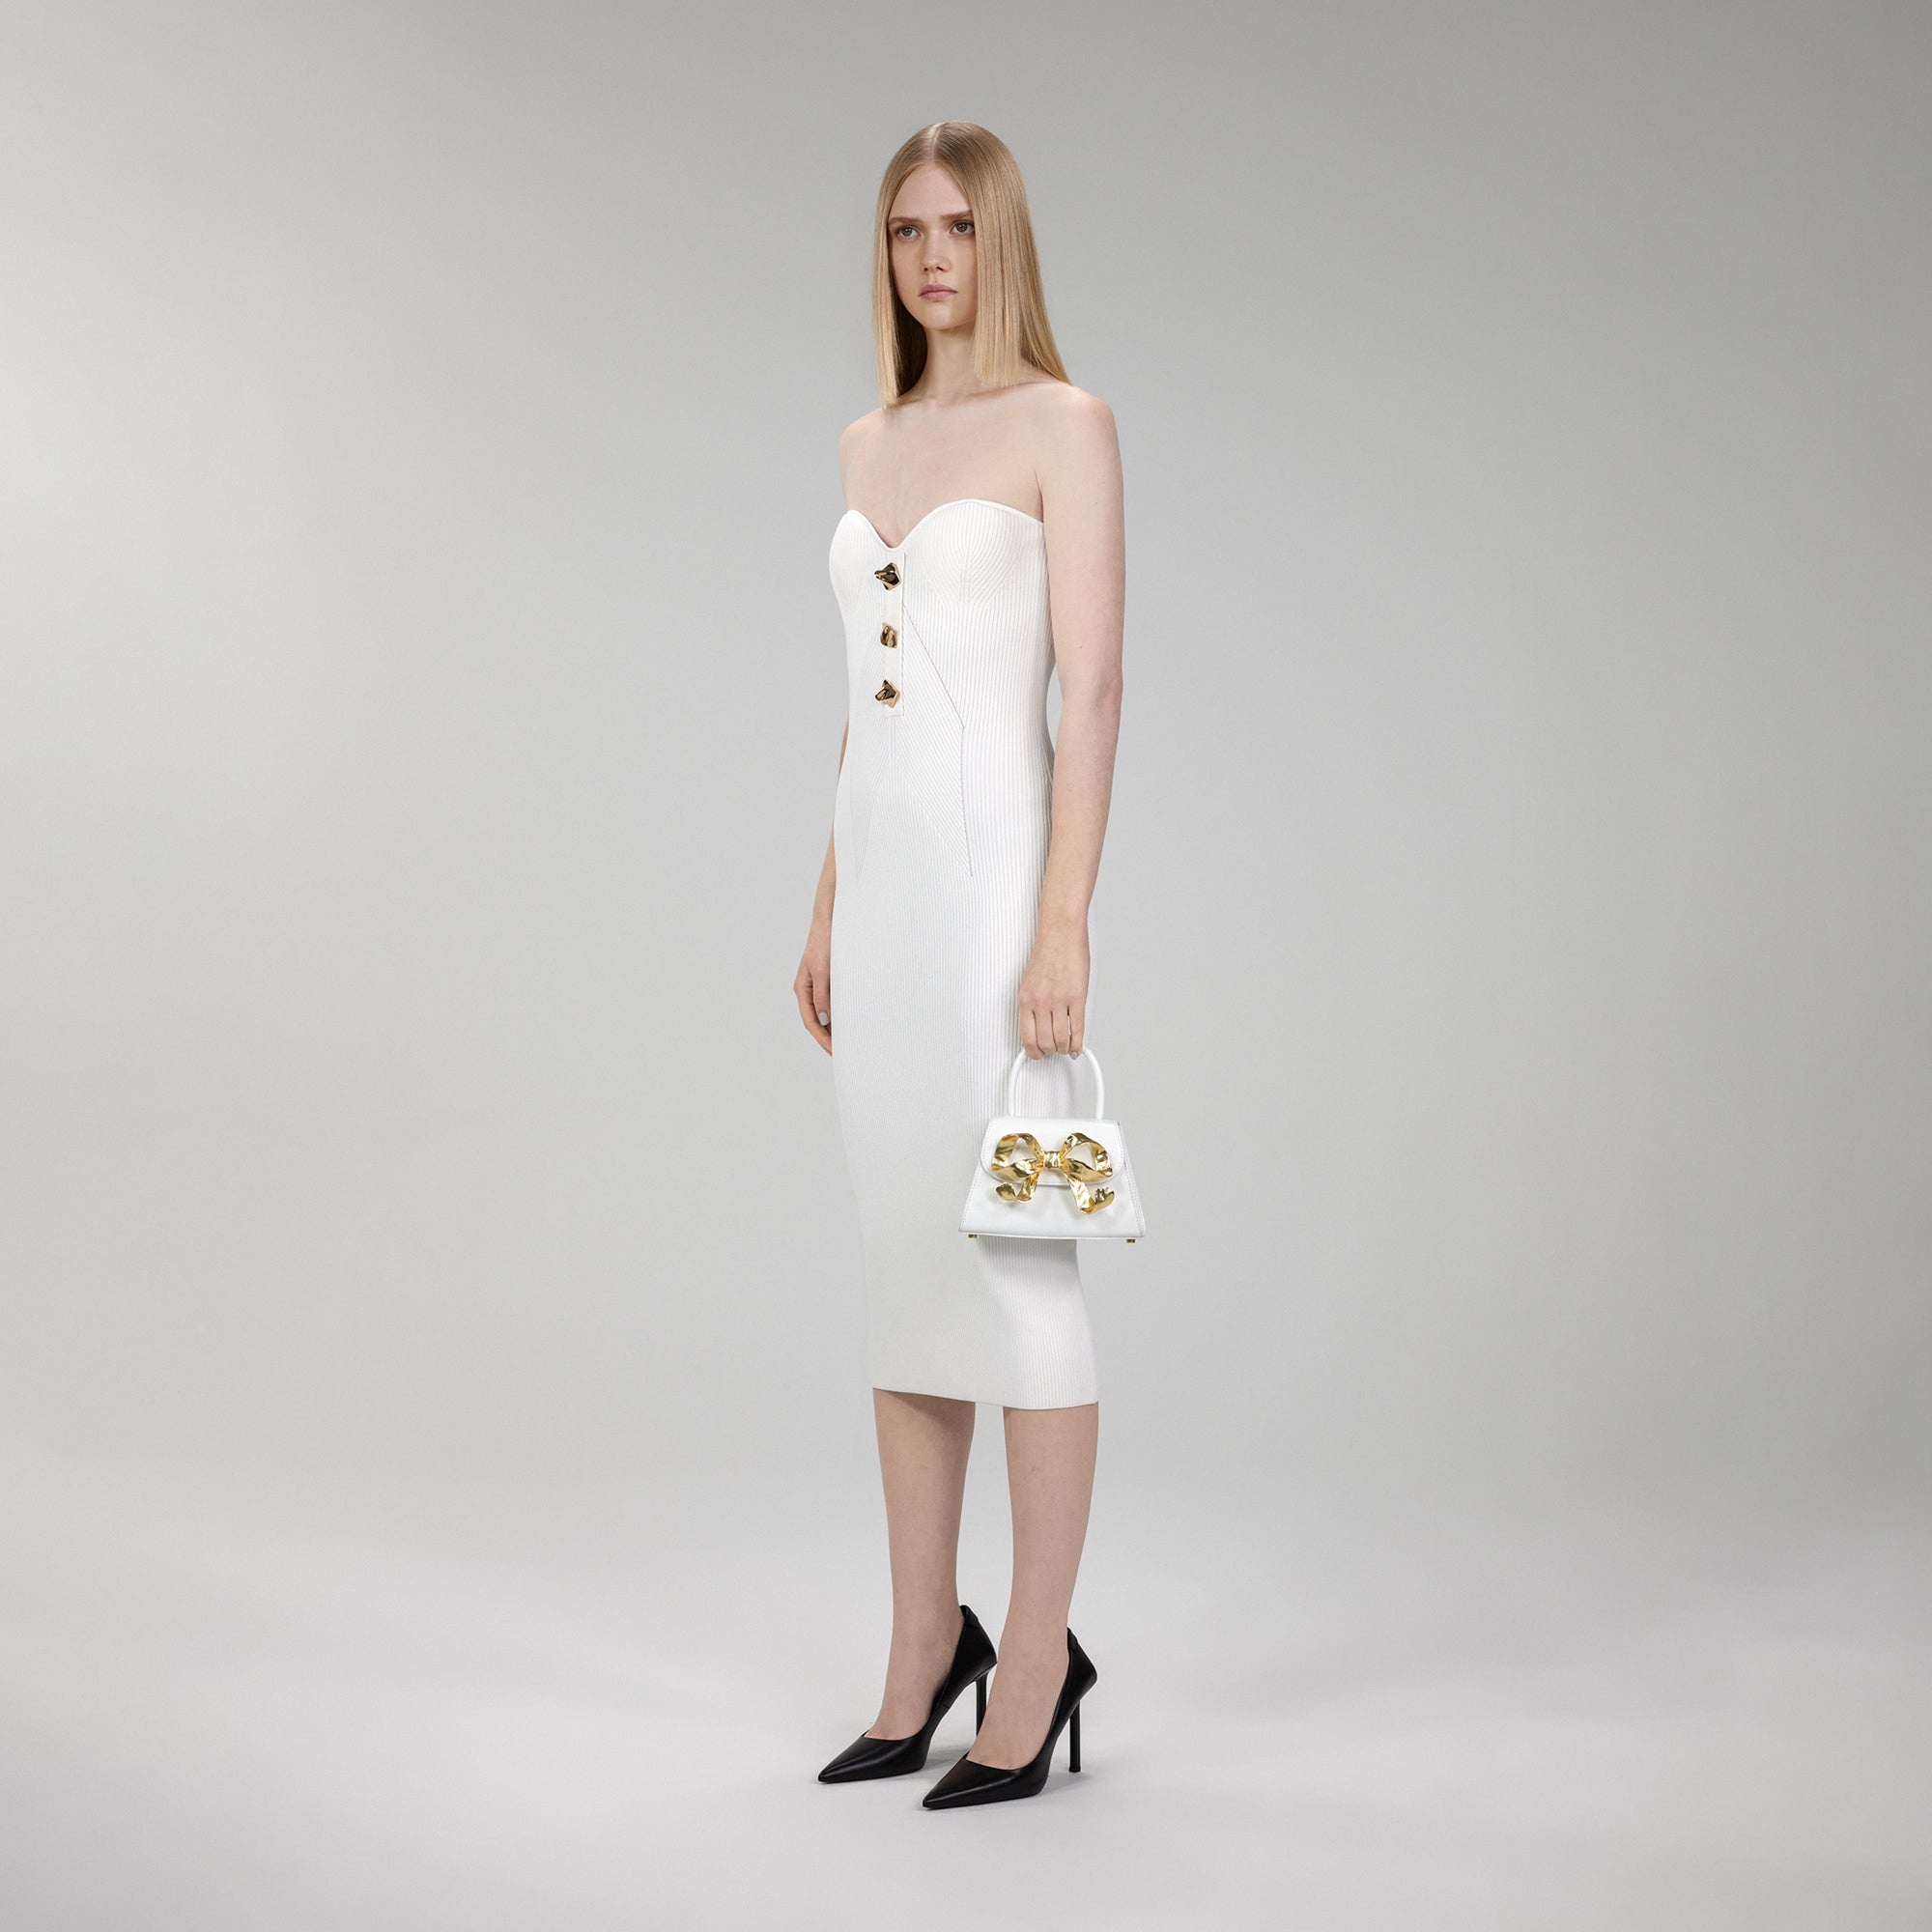 The Bow Mini in White with Gold Hardware - 5